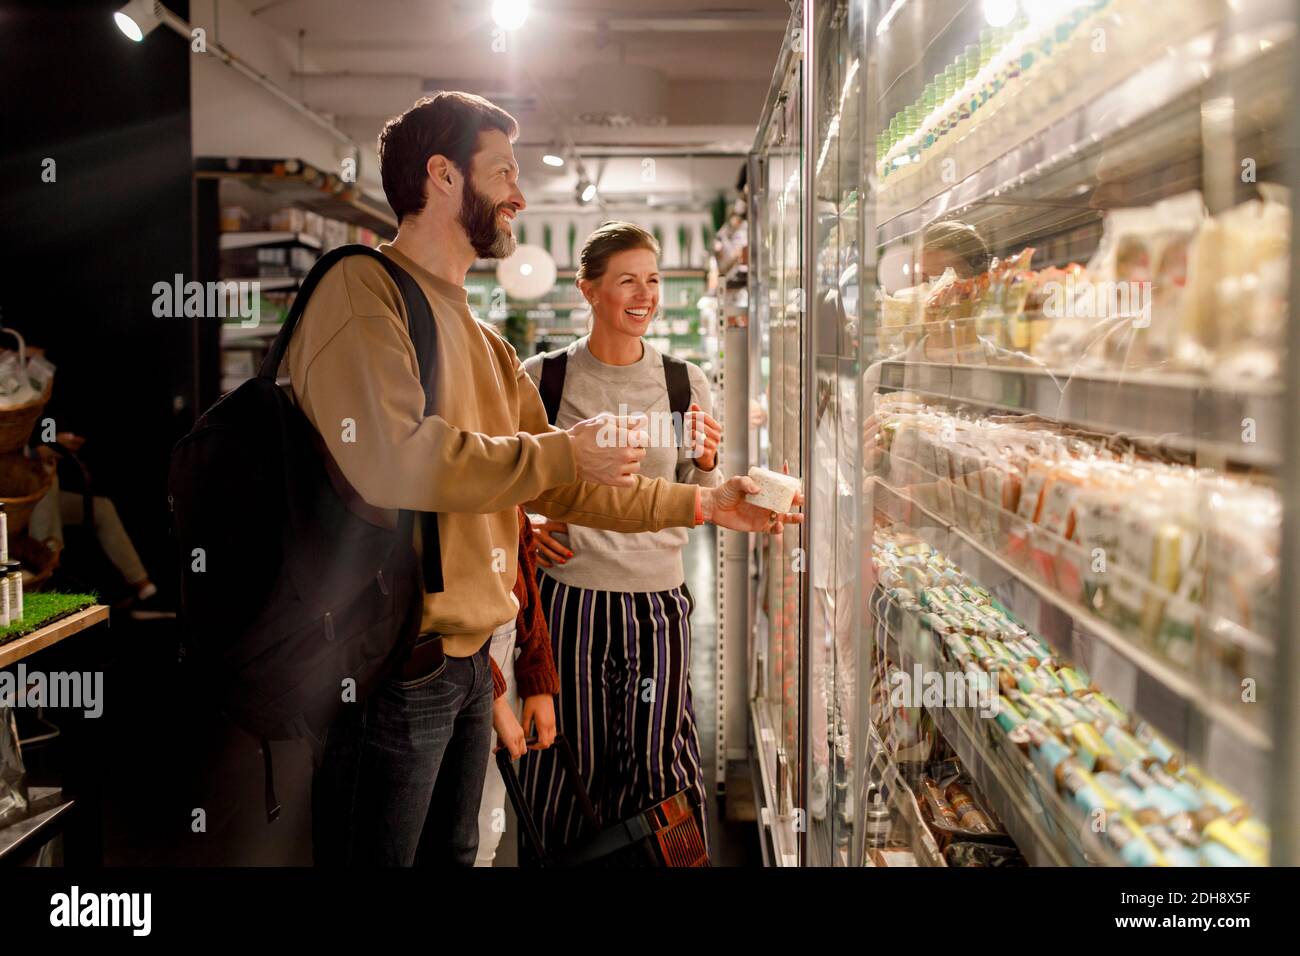 Smiling couple shopping in supermarket Stock Photo